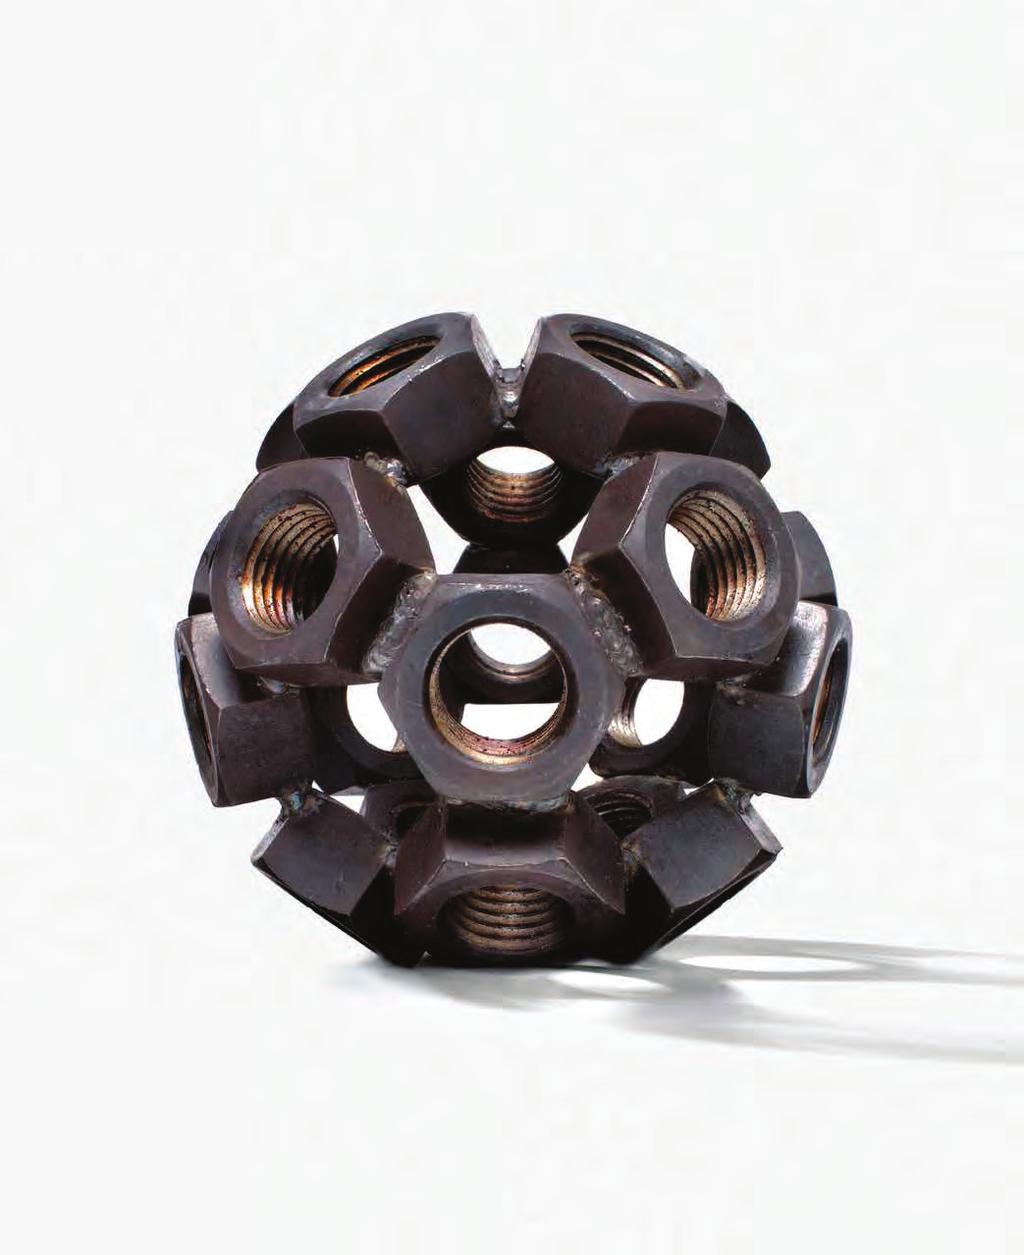 OSCAR TUAZON Alloy (For Steve Baer), 2011 For Parkett 89 20 hex nuts, assembled and welded into a sphere,